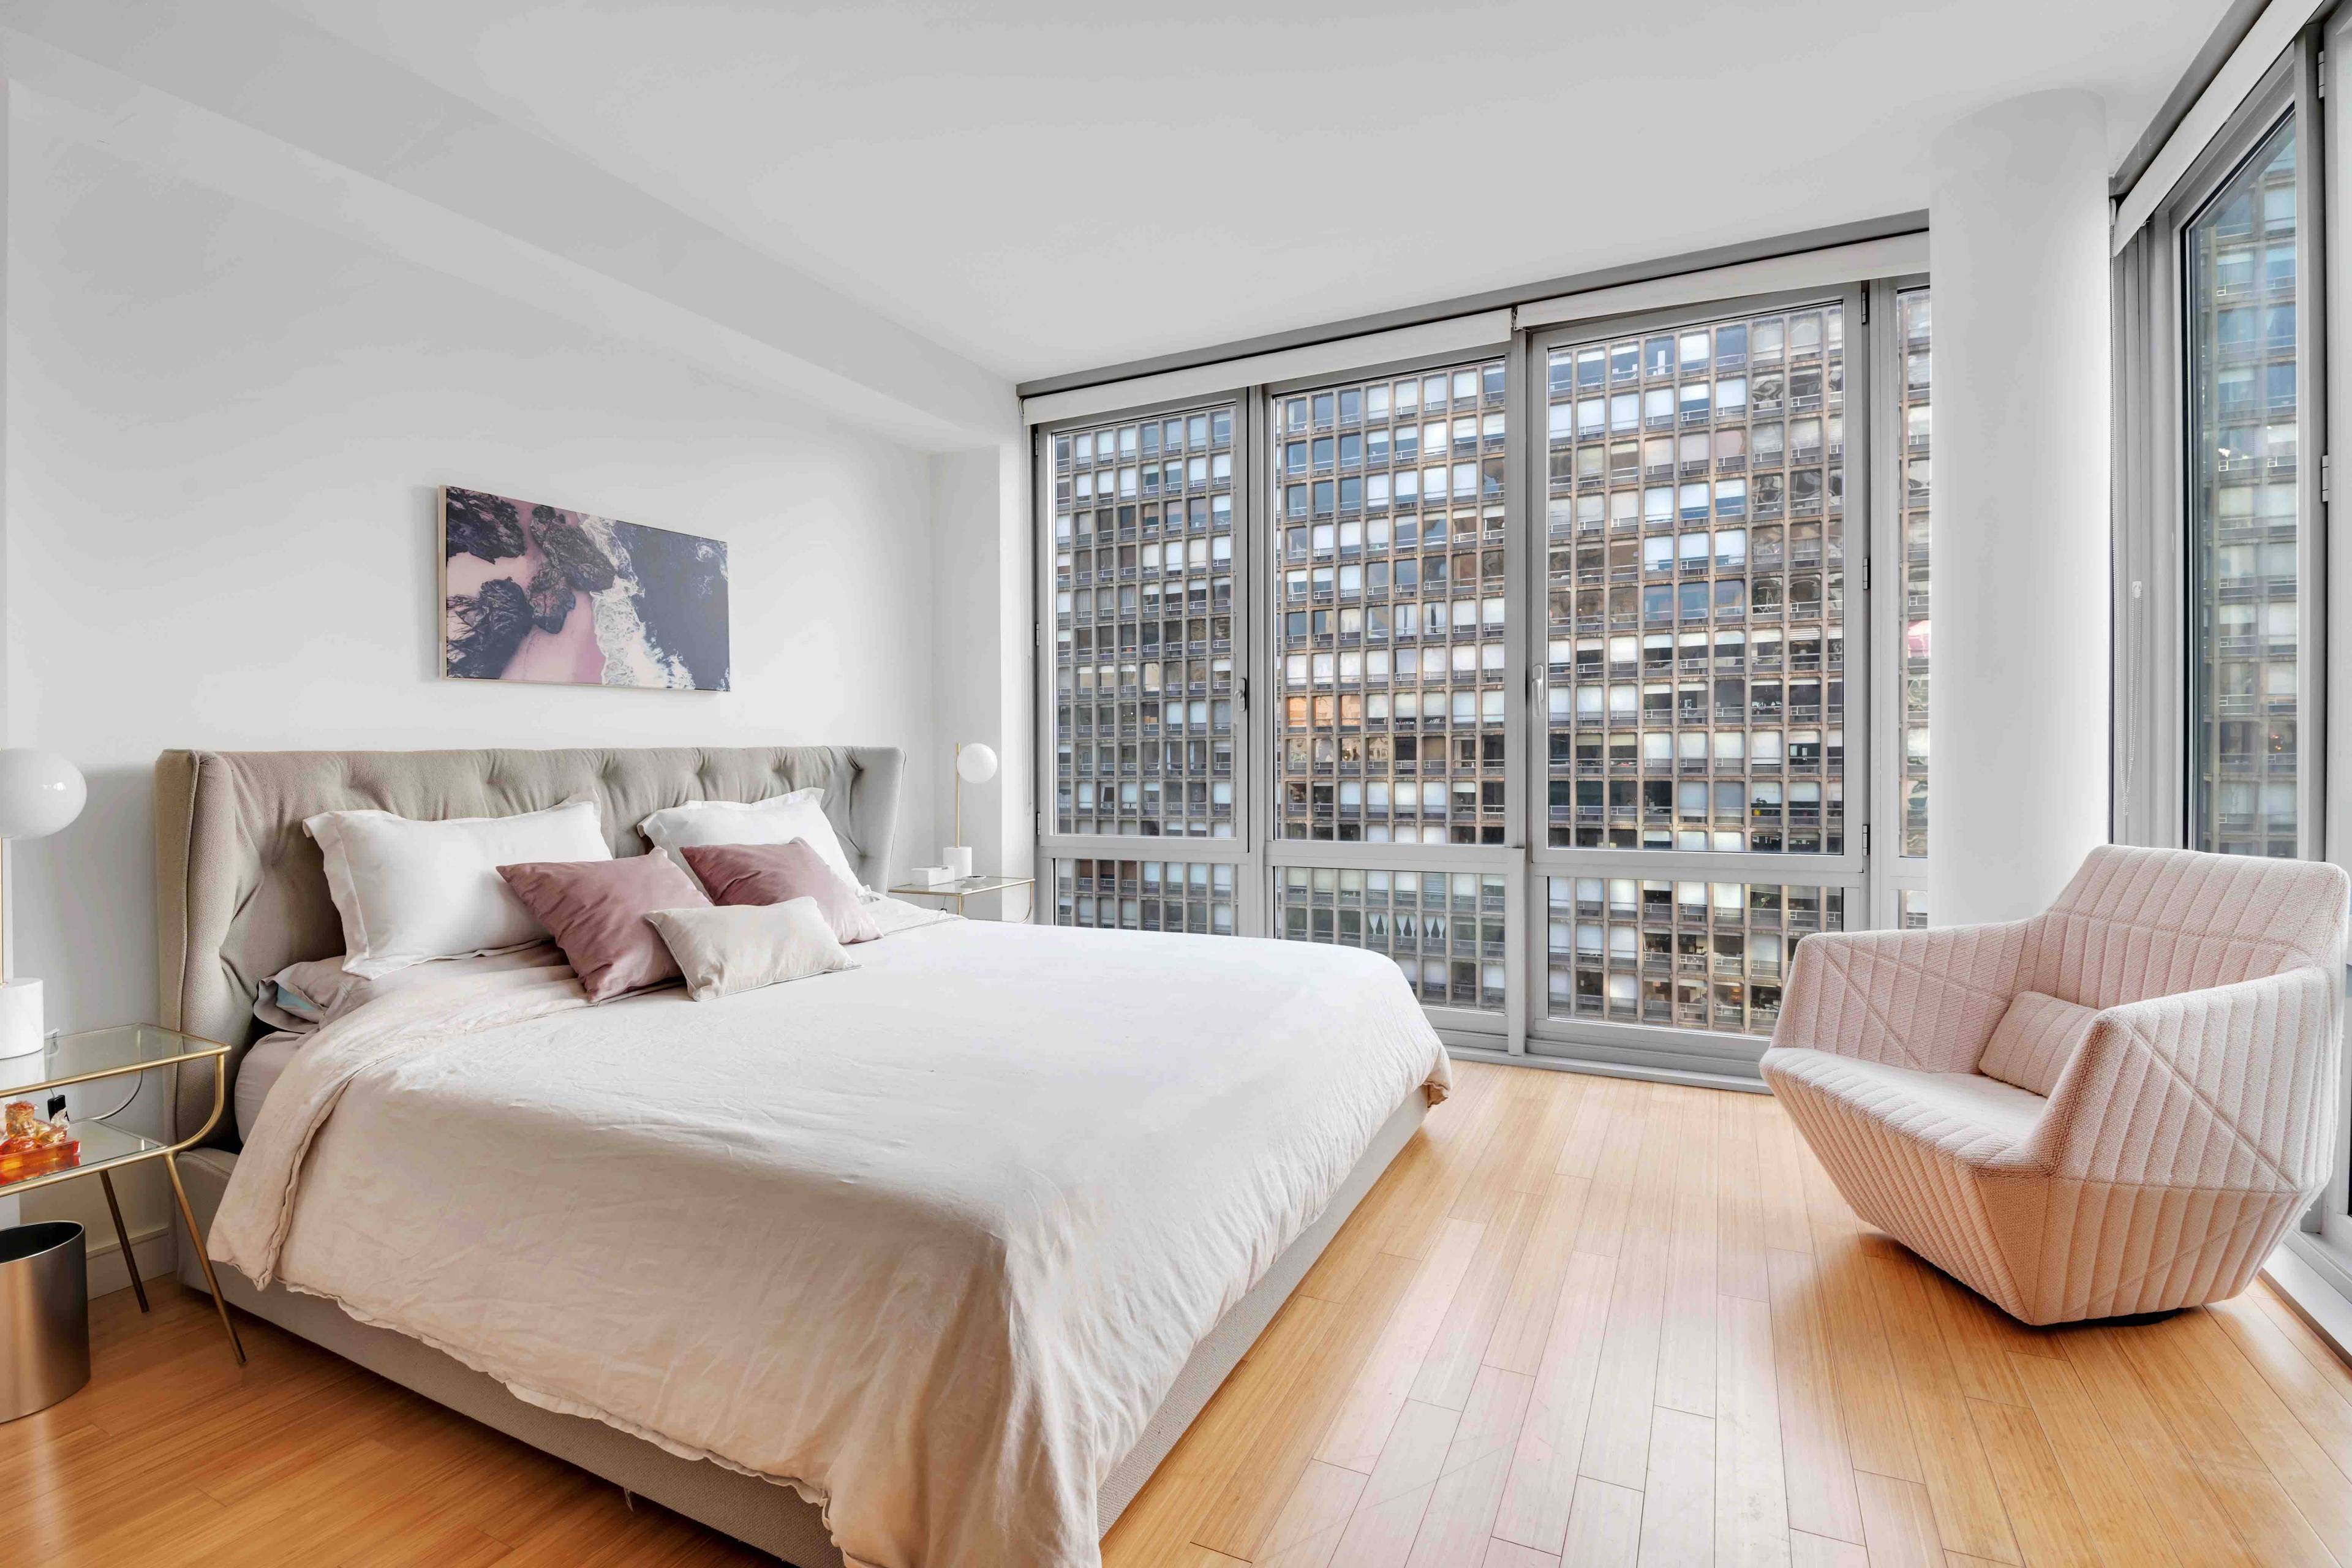 Introducing a one of a kind residence at 303 East 33rd Street.